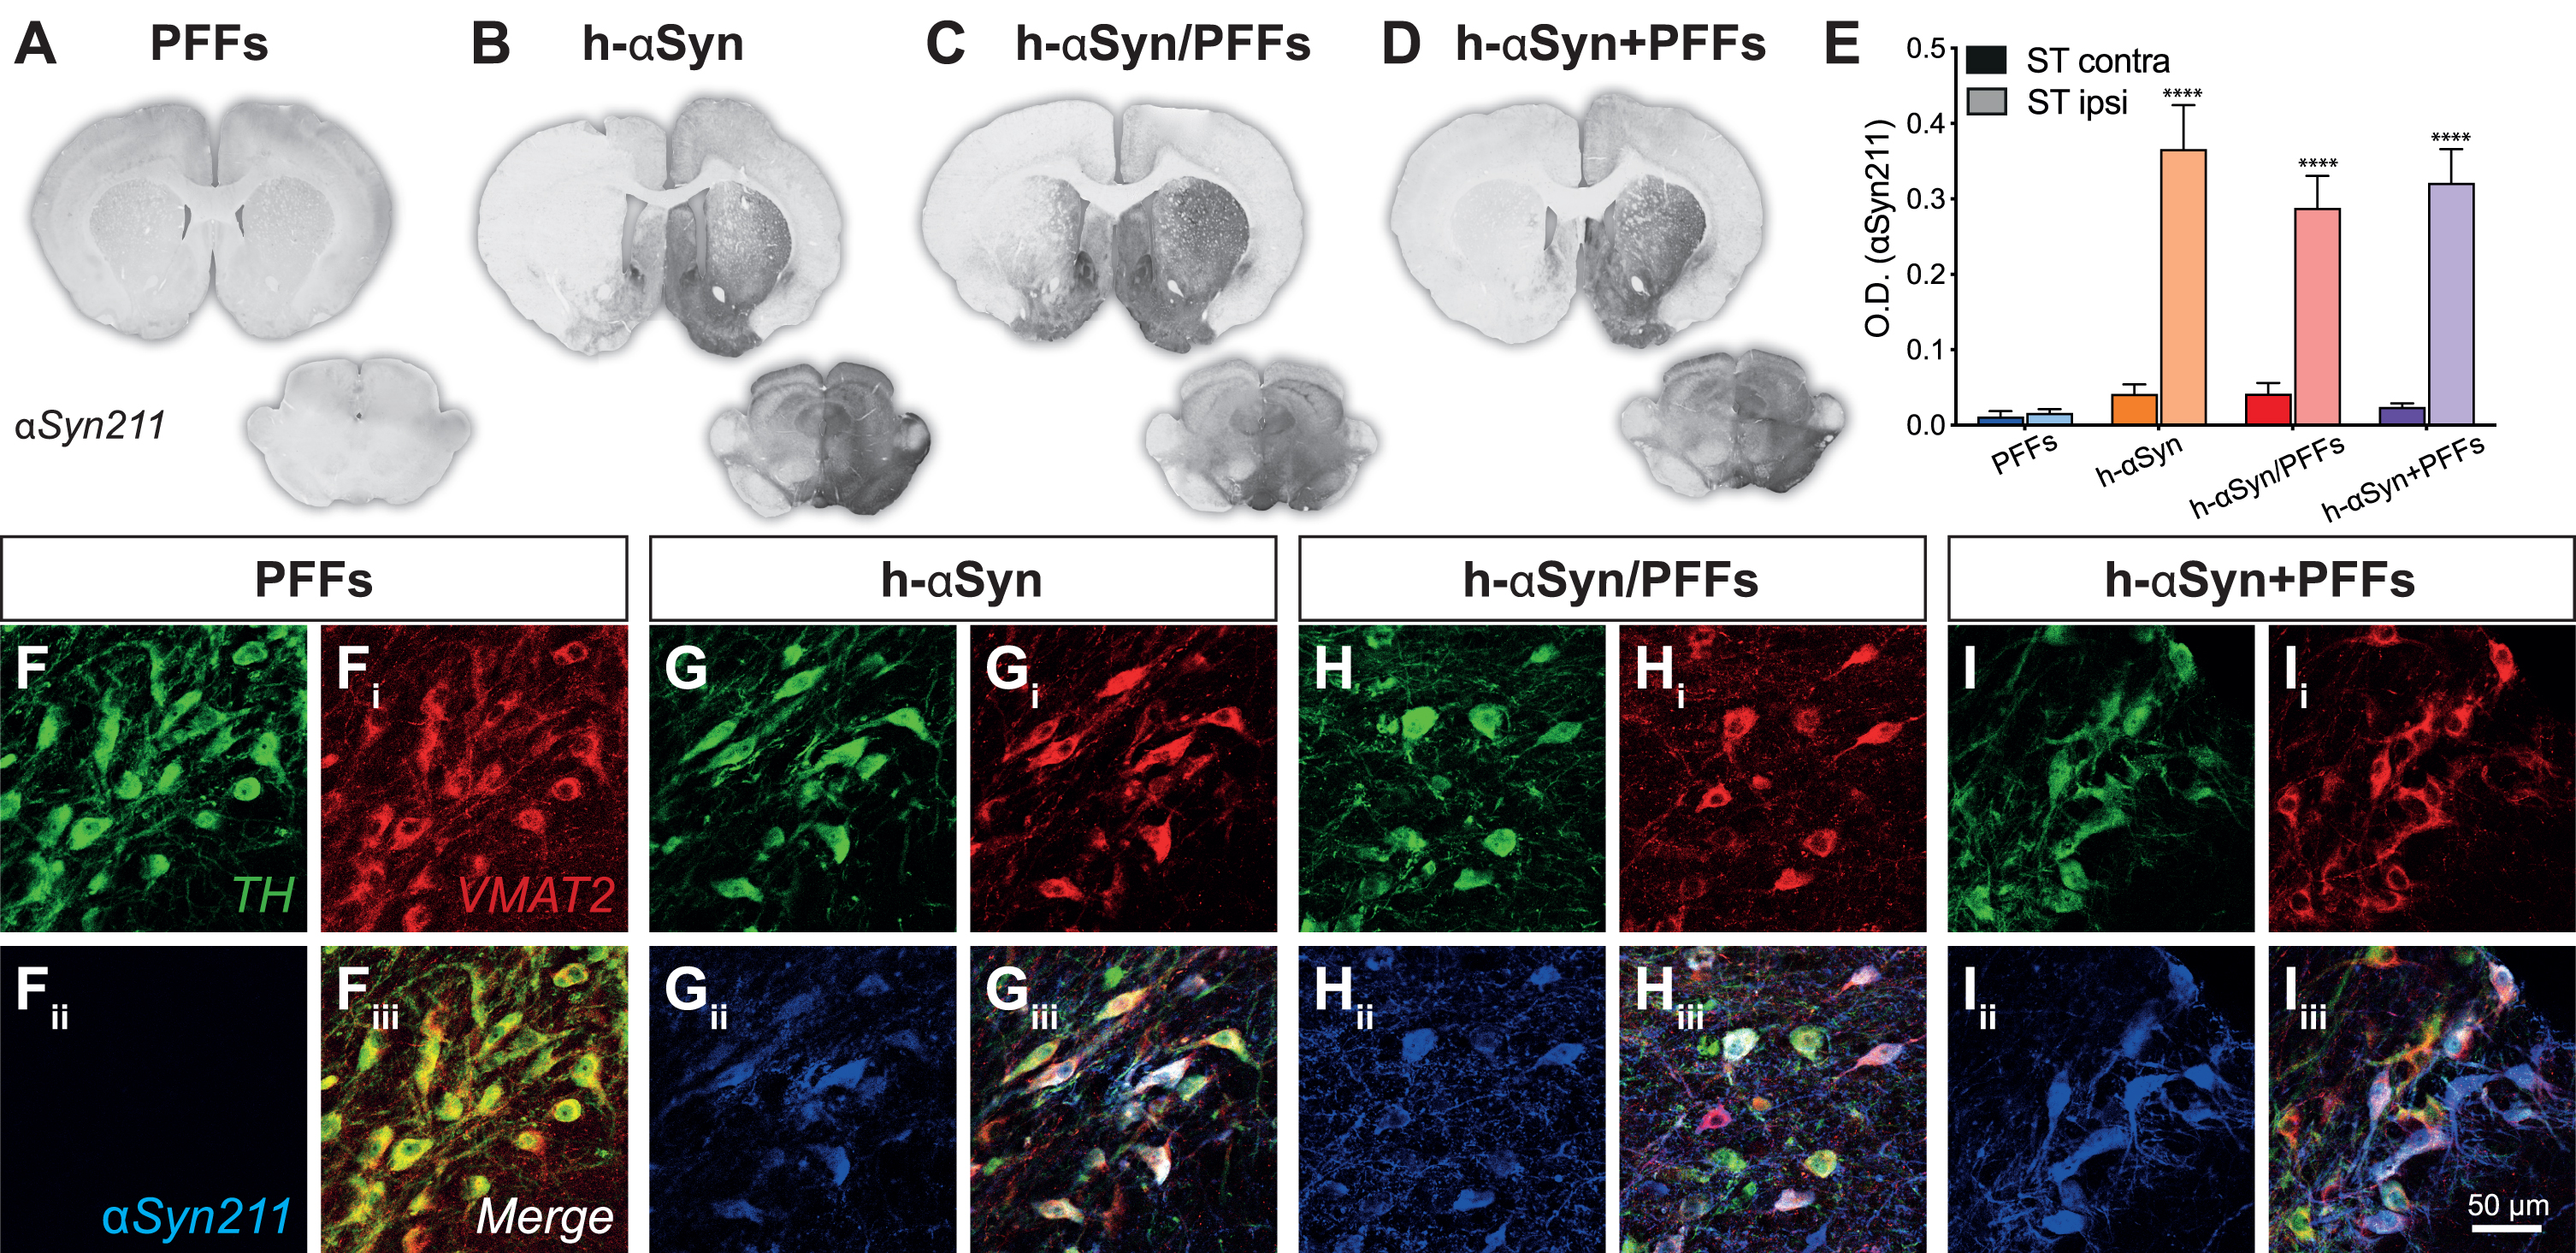 AAV-vector overexpression. A-D) Representative midbrain and striatal sections for each group stained for human αSyn (αSyn211). E) Densitometric analysis comparing human αSyn211 staining intensity between contralateral and ipsilateral right striatum. F-Iiii) Triple immunofluorescence demonstrating colocalization between TH, VMAT2, and αSyn211 antibodies in SNpc. PFFs, preformed fibrils; h-αSyn, human alpha-synuclein; contra, contralateral; ipsi, ipsilateral; O.D., optical density. Data are expressed as mean ± SEM. (****p < 0.0001).